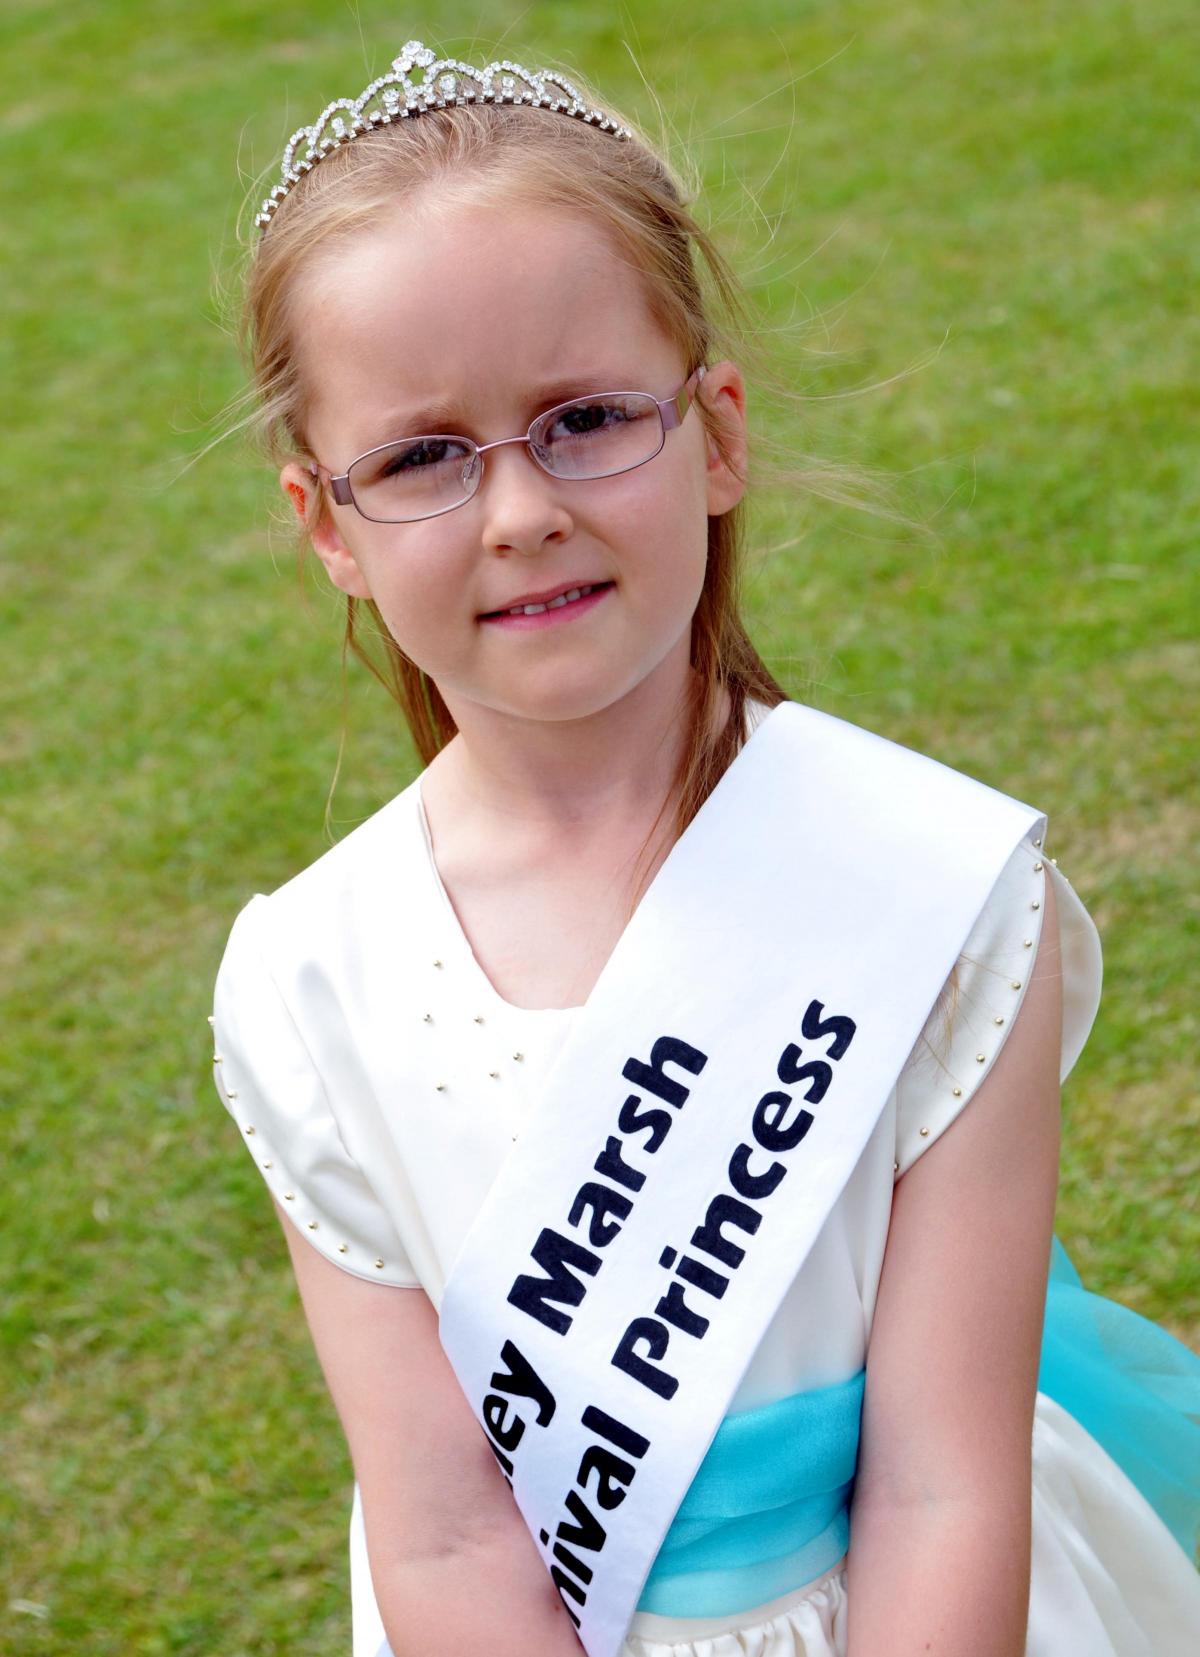 Jessica Healy, six, one of the carnival princesses